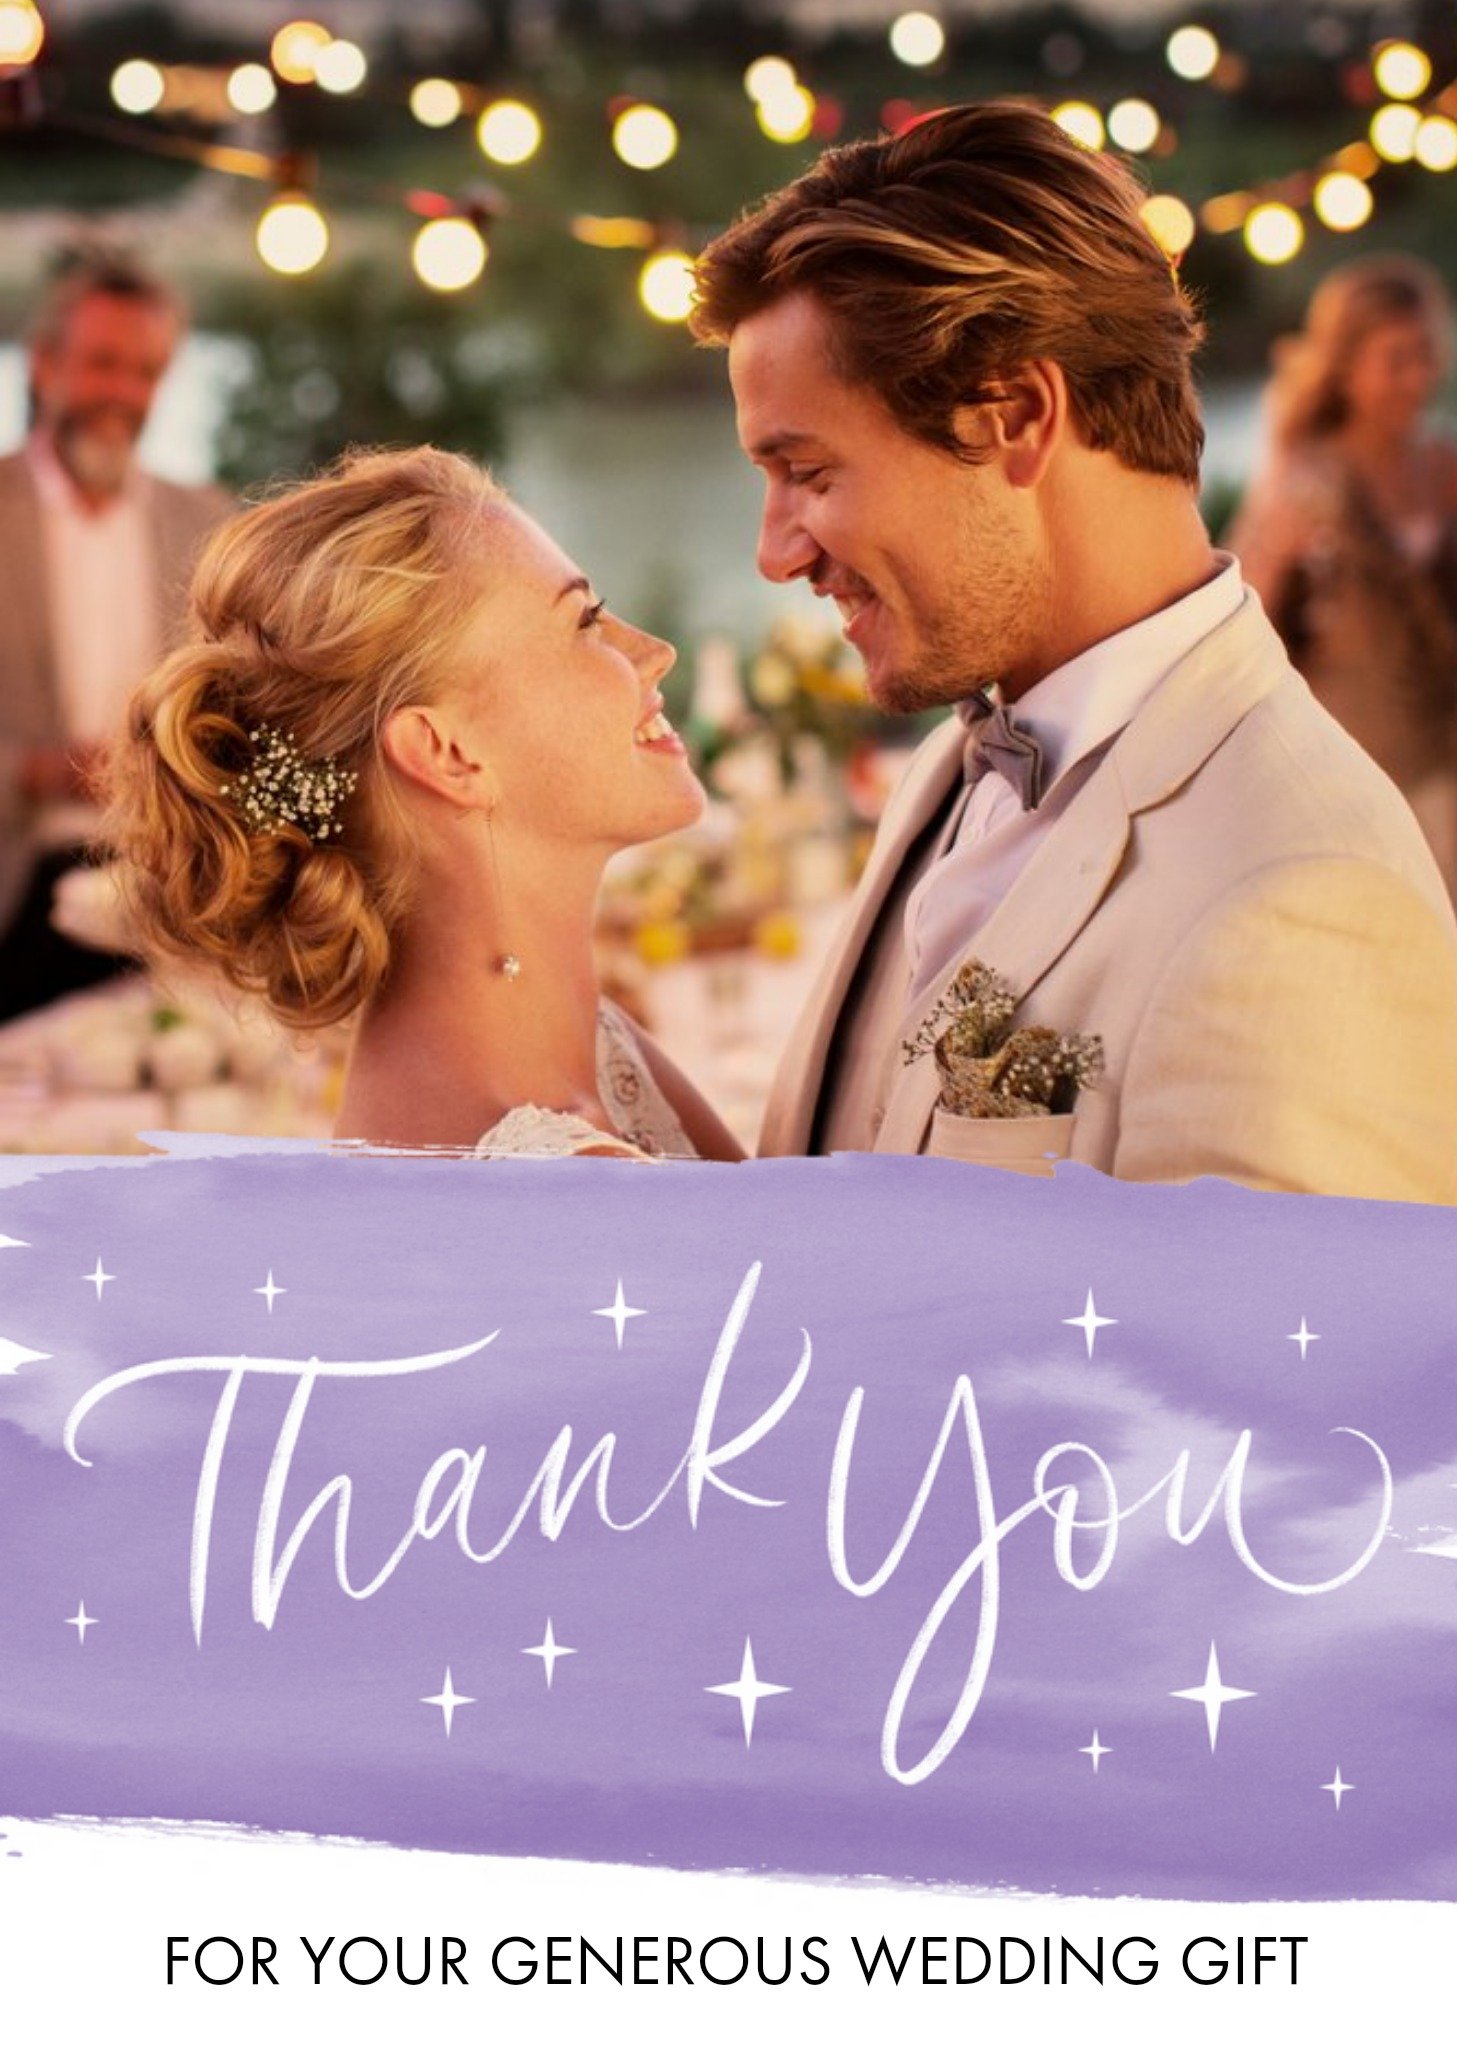 Moonpig Handwritten Thank You For Your Wedding Gift Photo Upload Card, Large